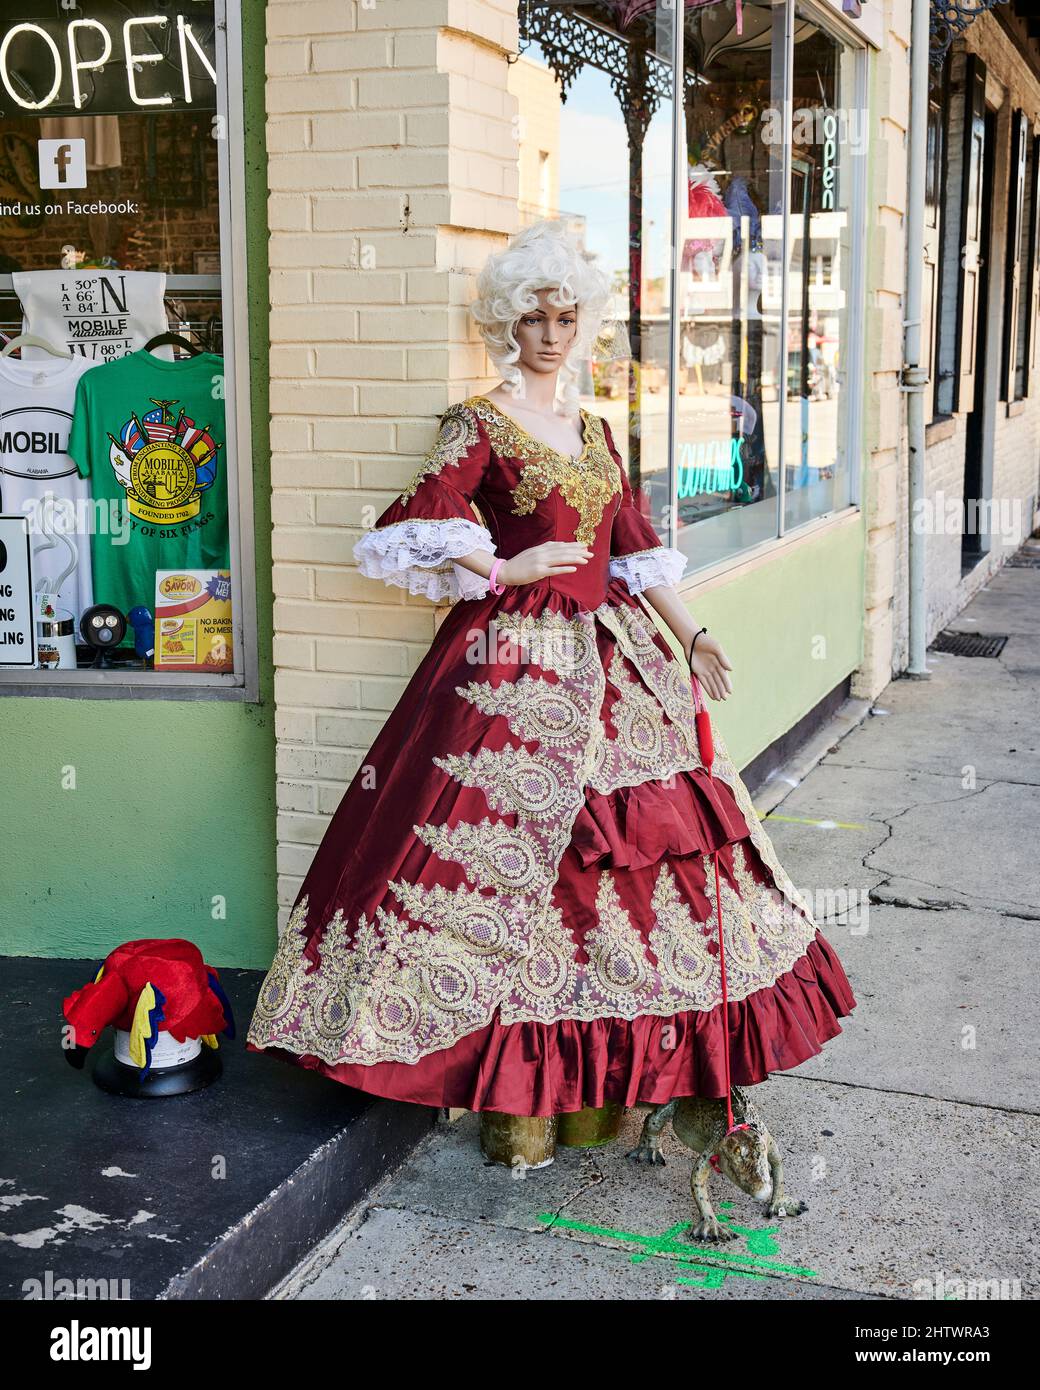 Female mannequin on a Mobile Alabama, USA, sidewalk dressed in Mardi Gras costume, dress outfit. Stock Photo